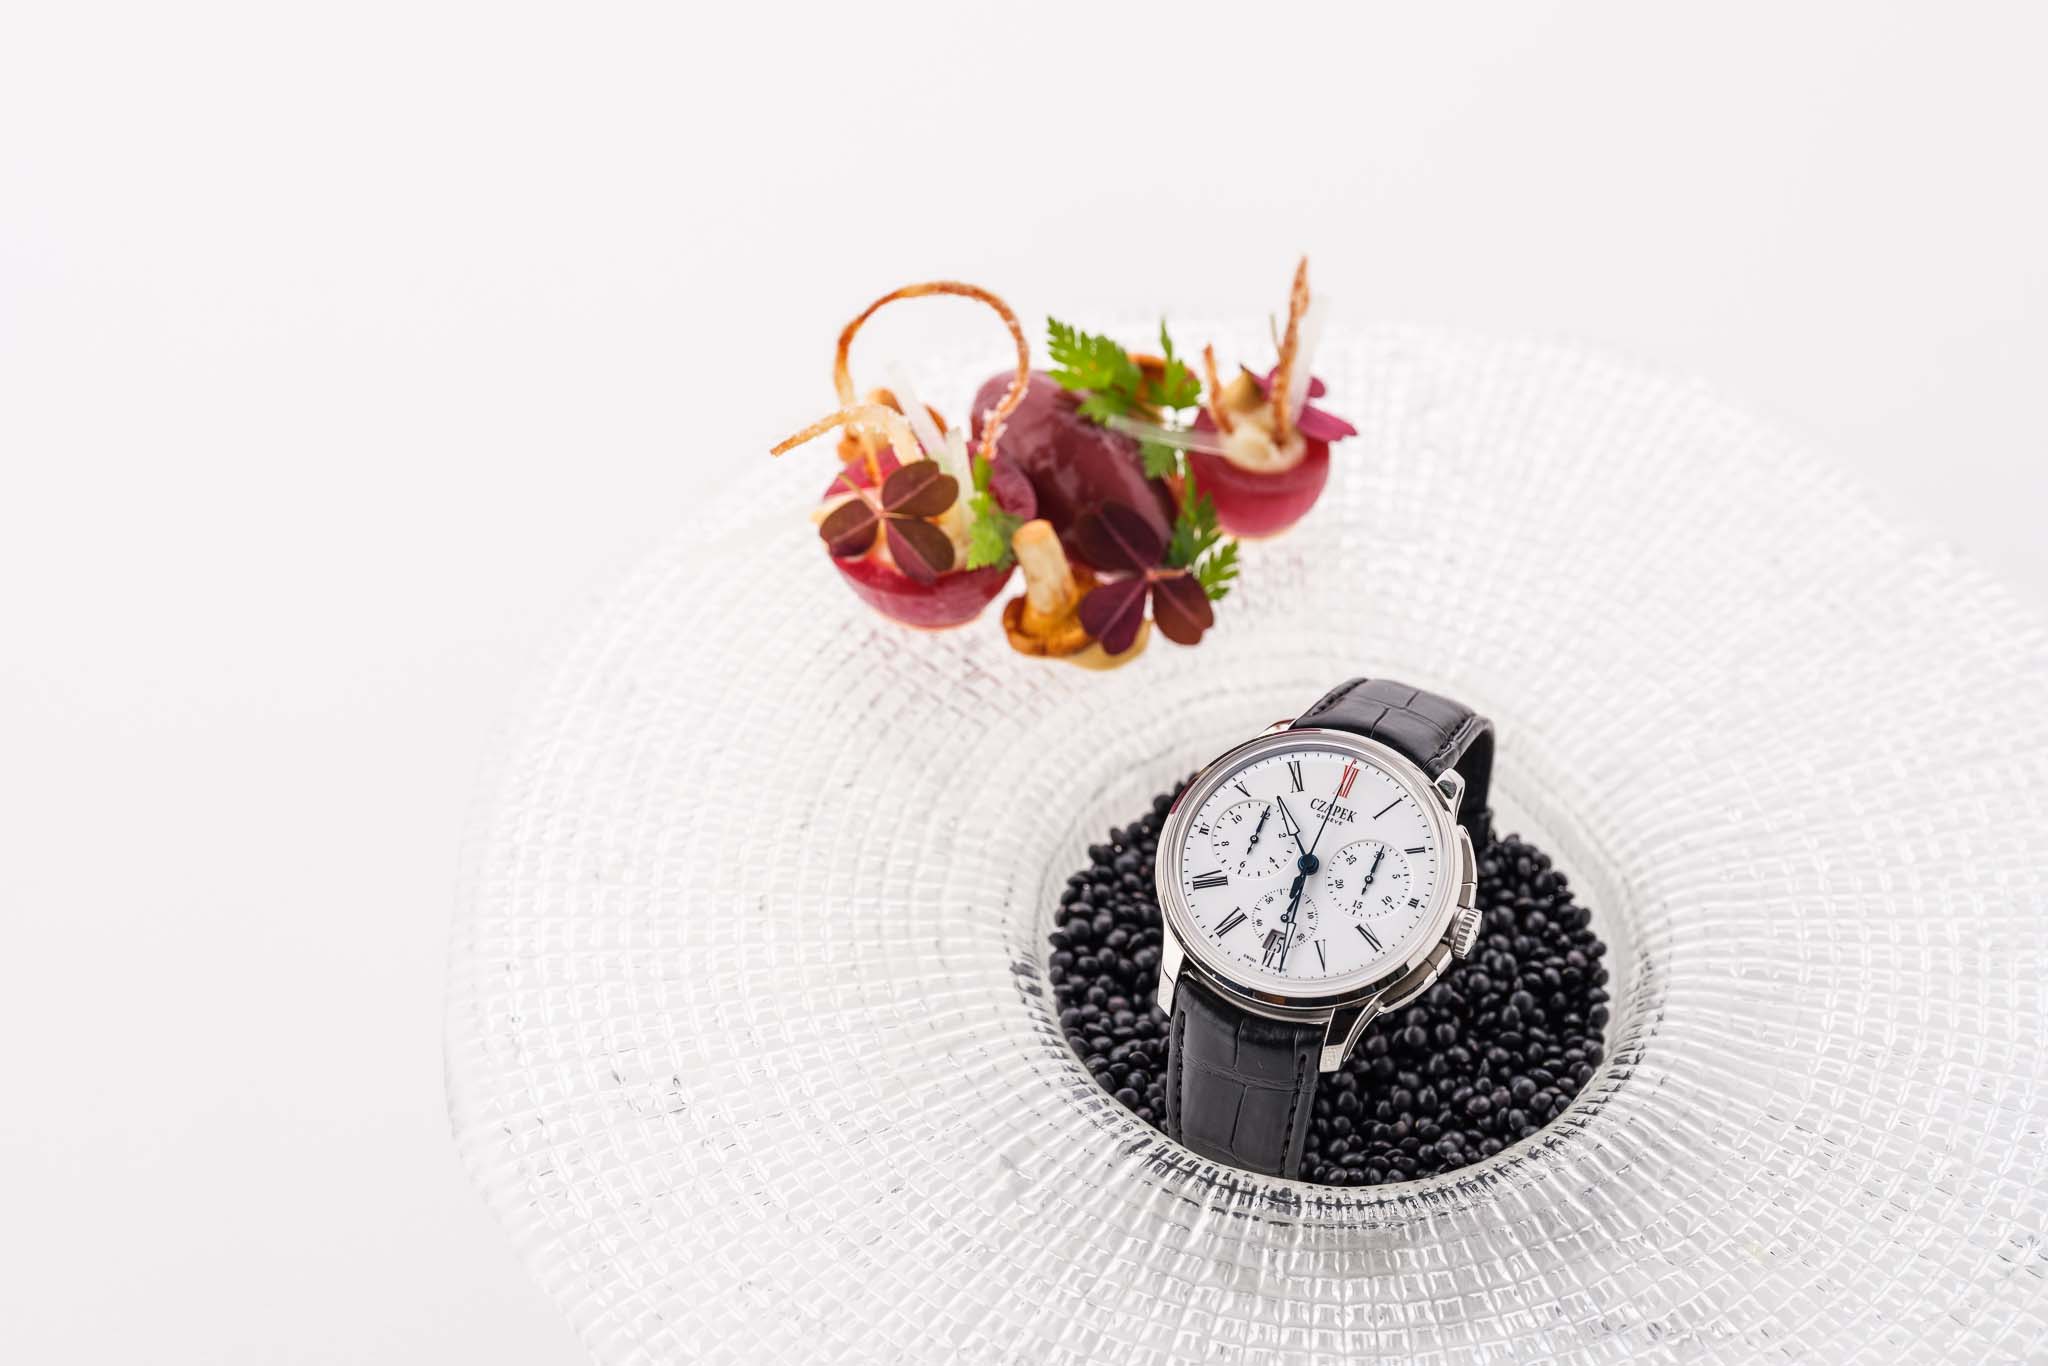 "Taste of Time" event: a culinary journey through indie watches